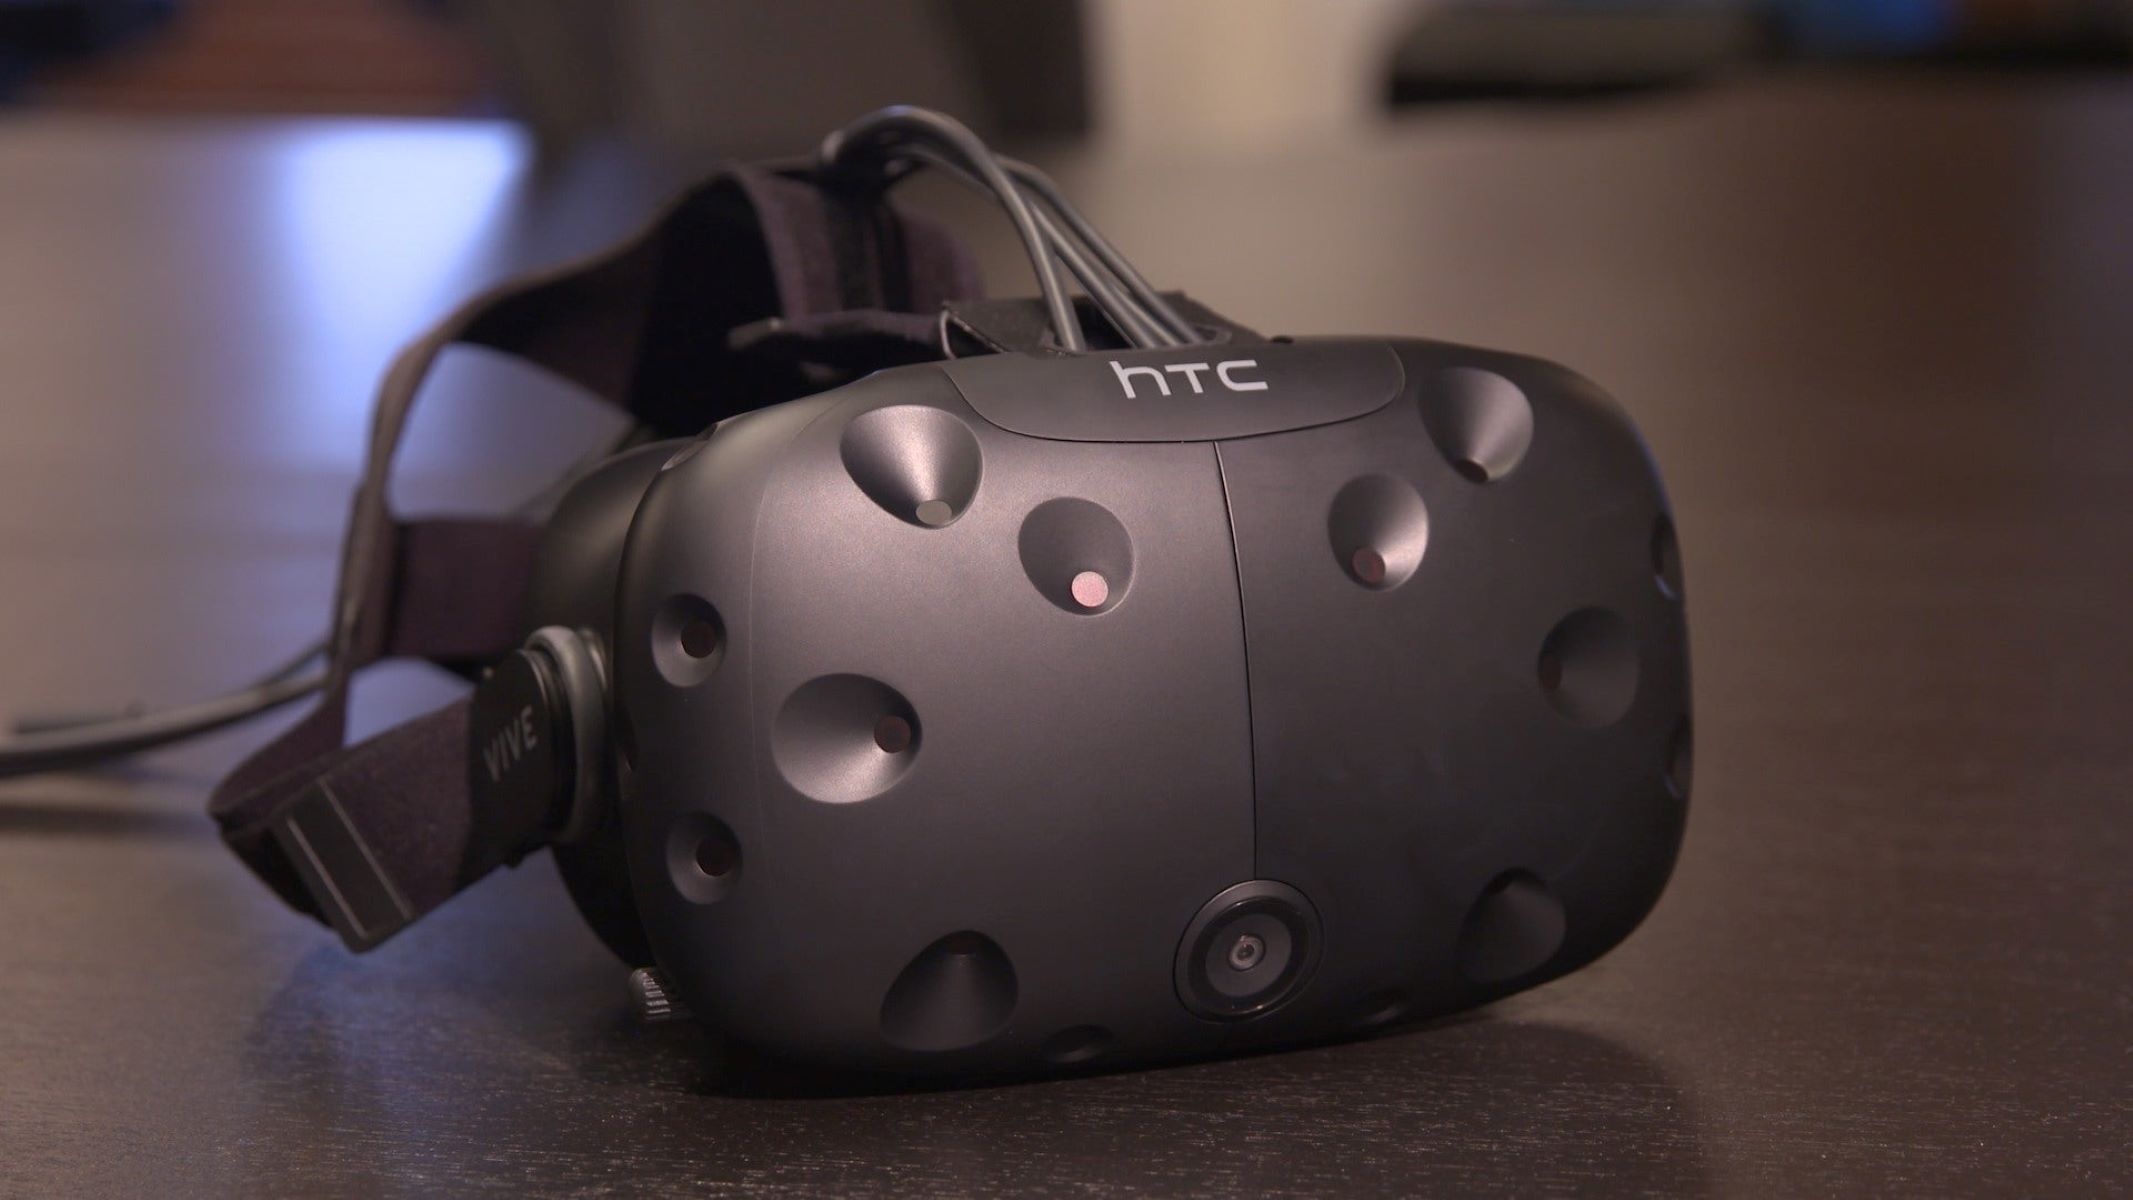 What Can You Do With A HTC Vive